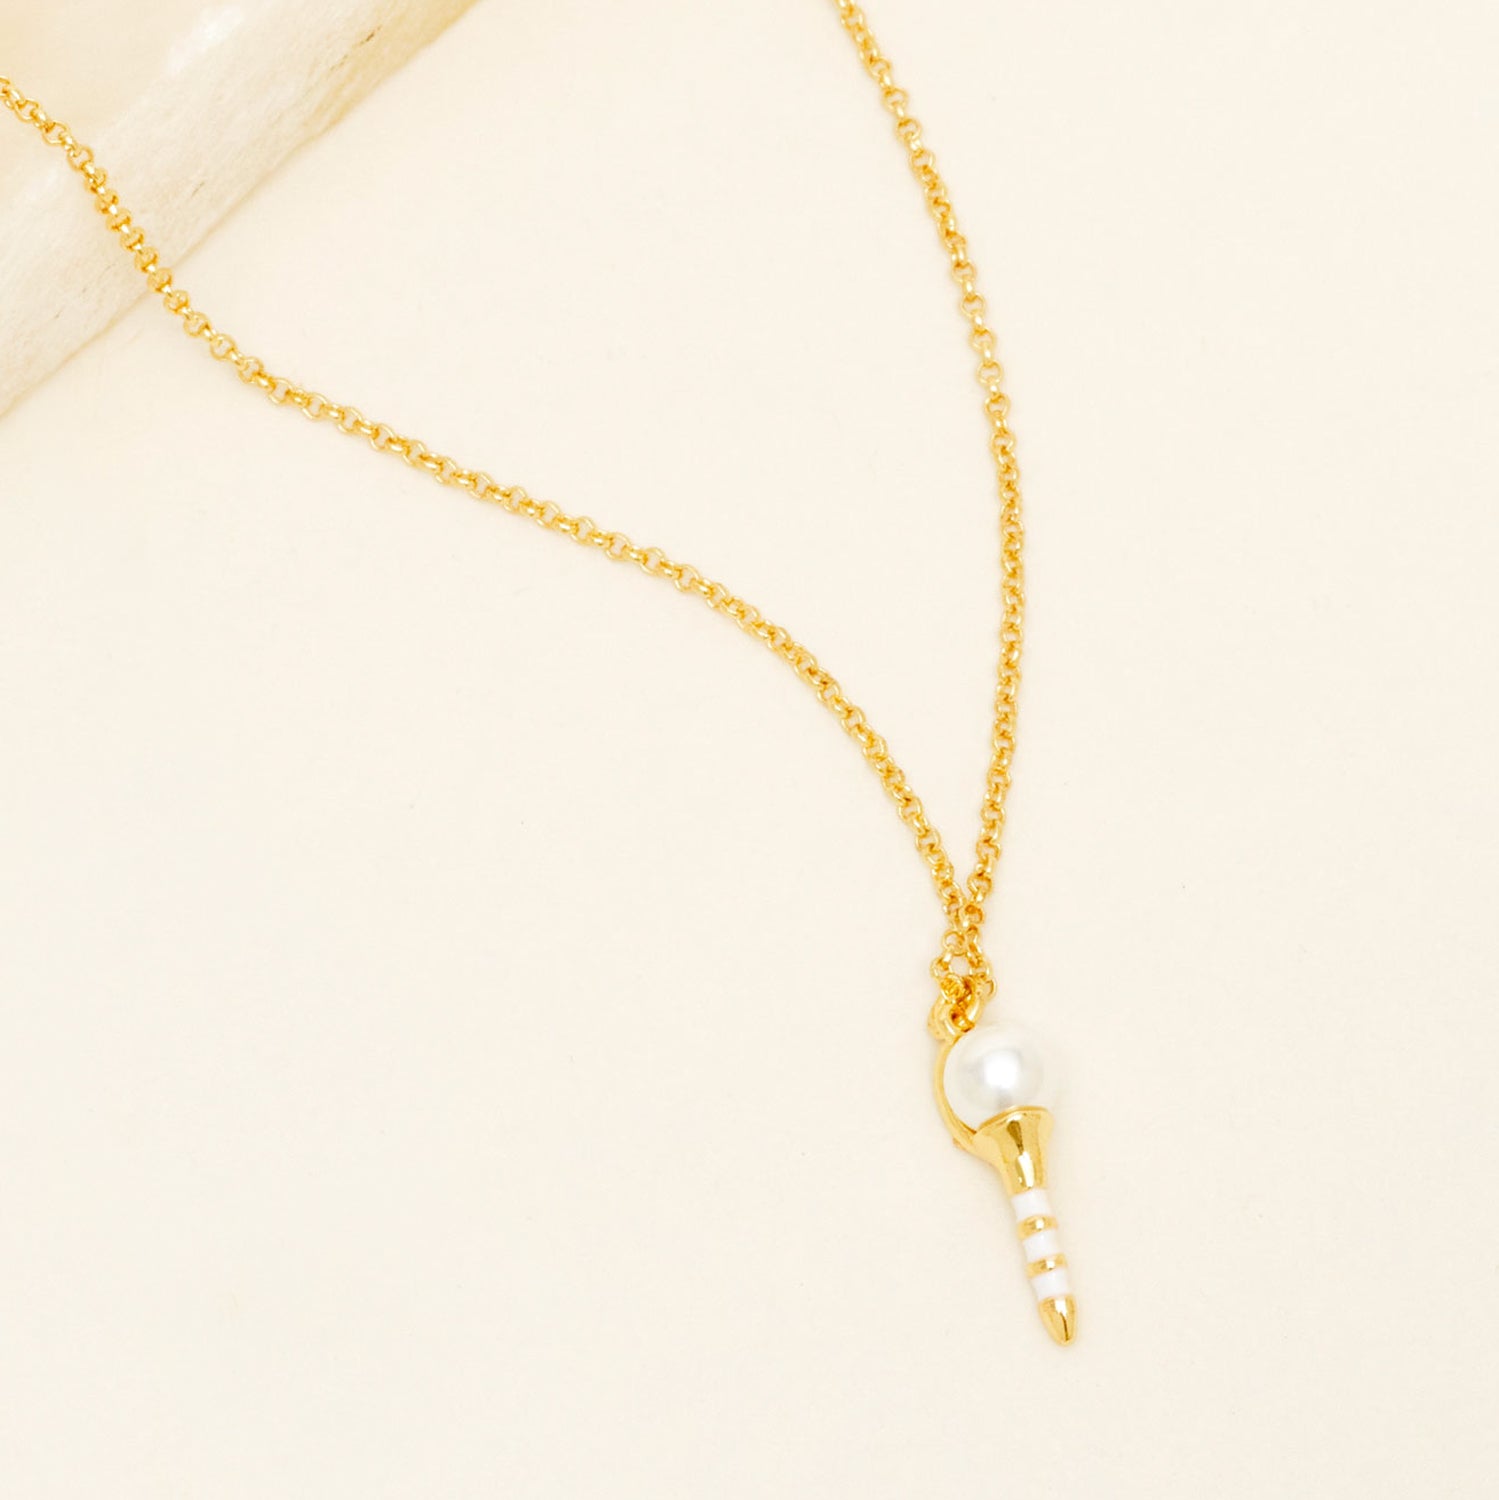 Tee Necklace White Gold by Mignonne Gavigan